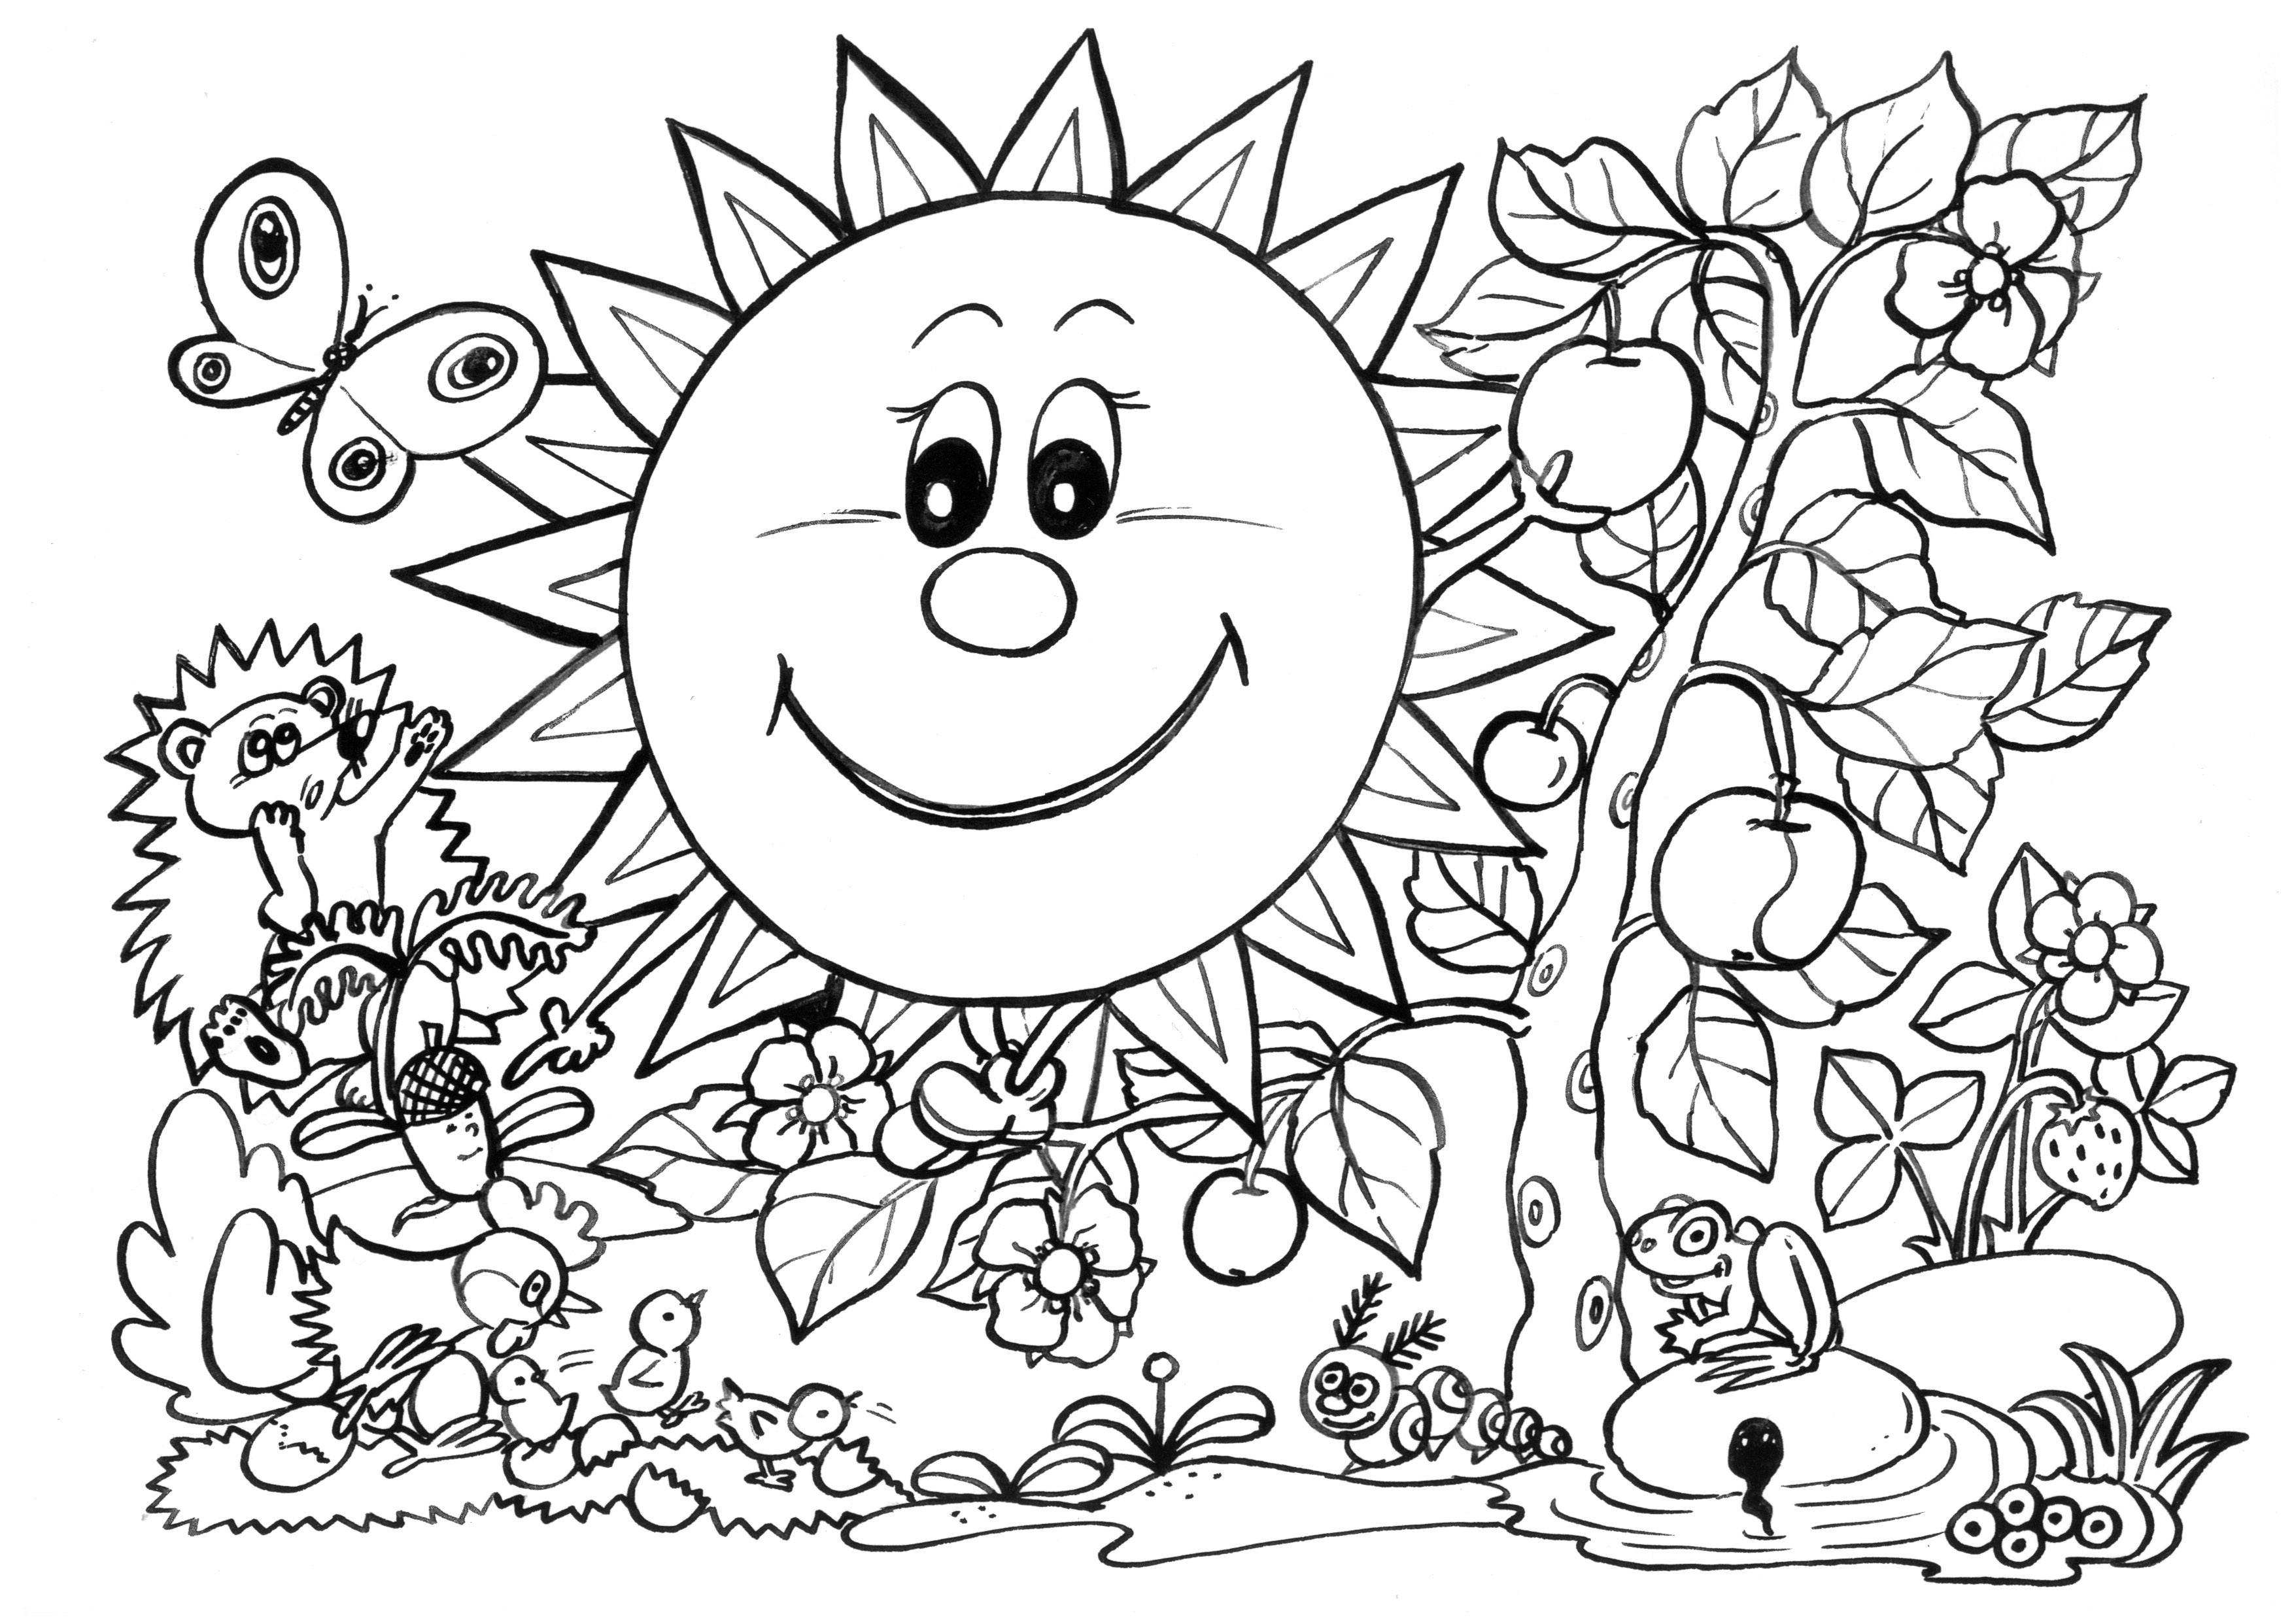 How To Print Large Coloring Pages